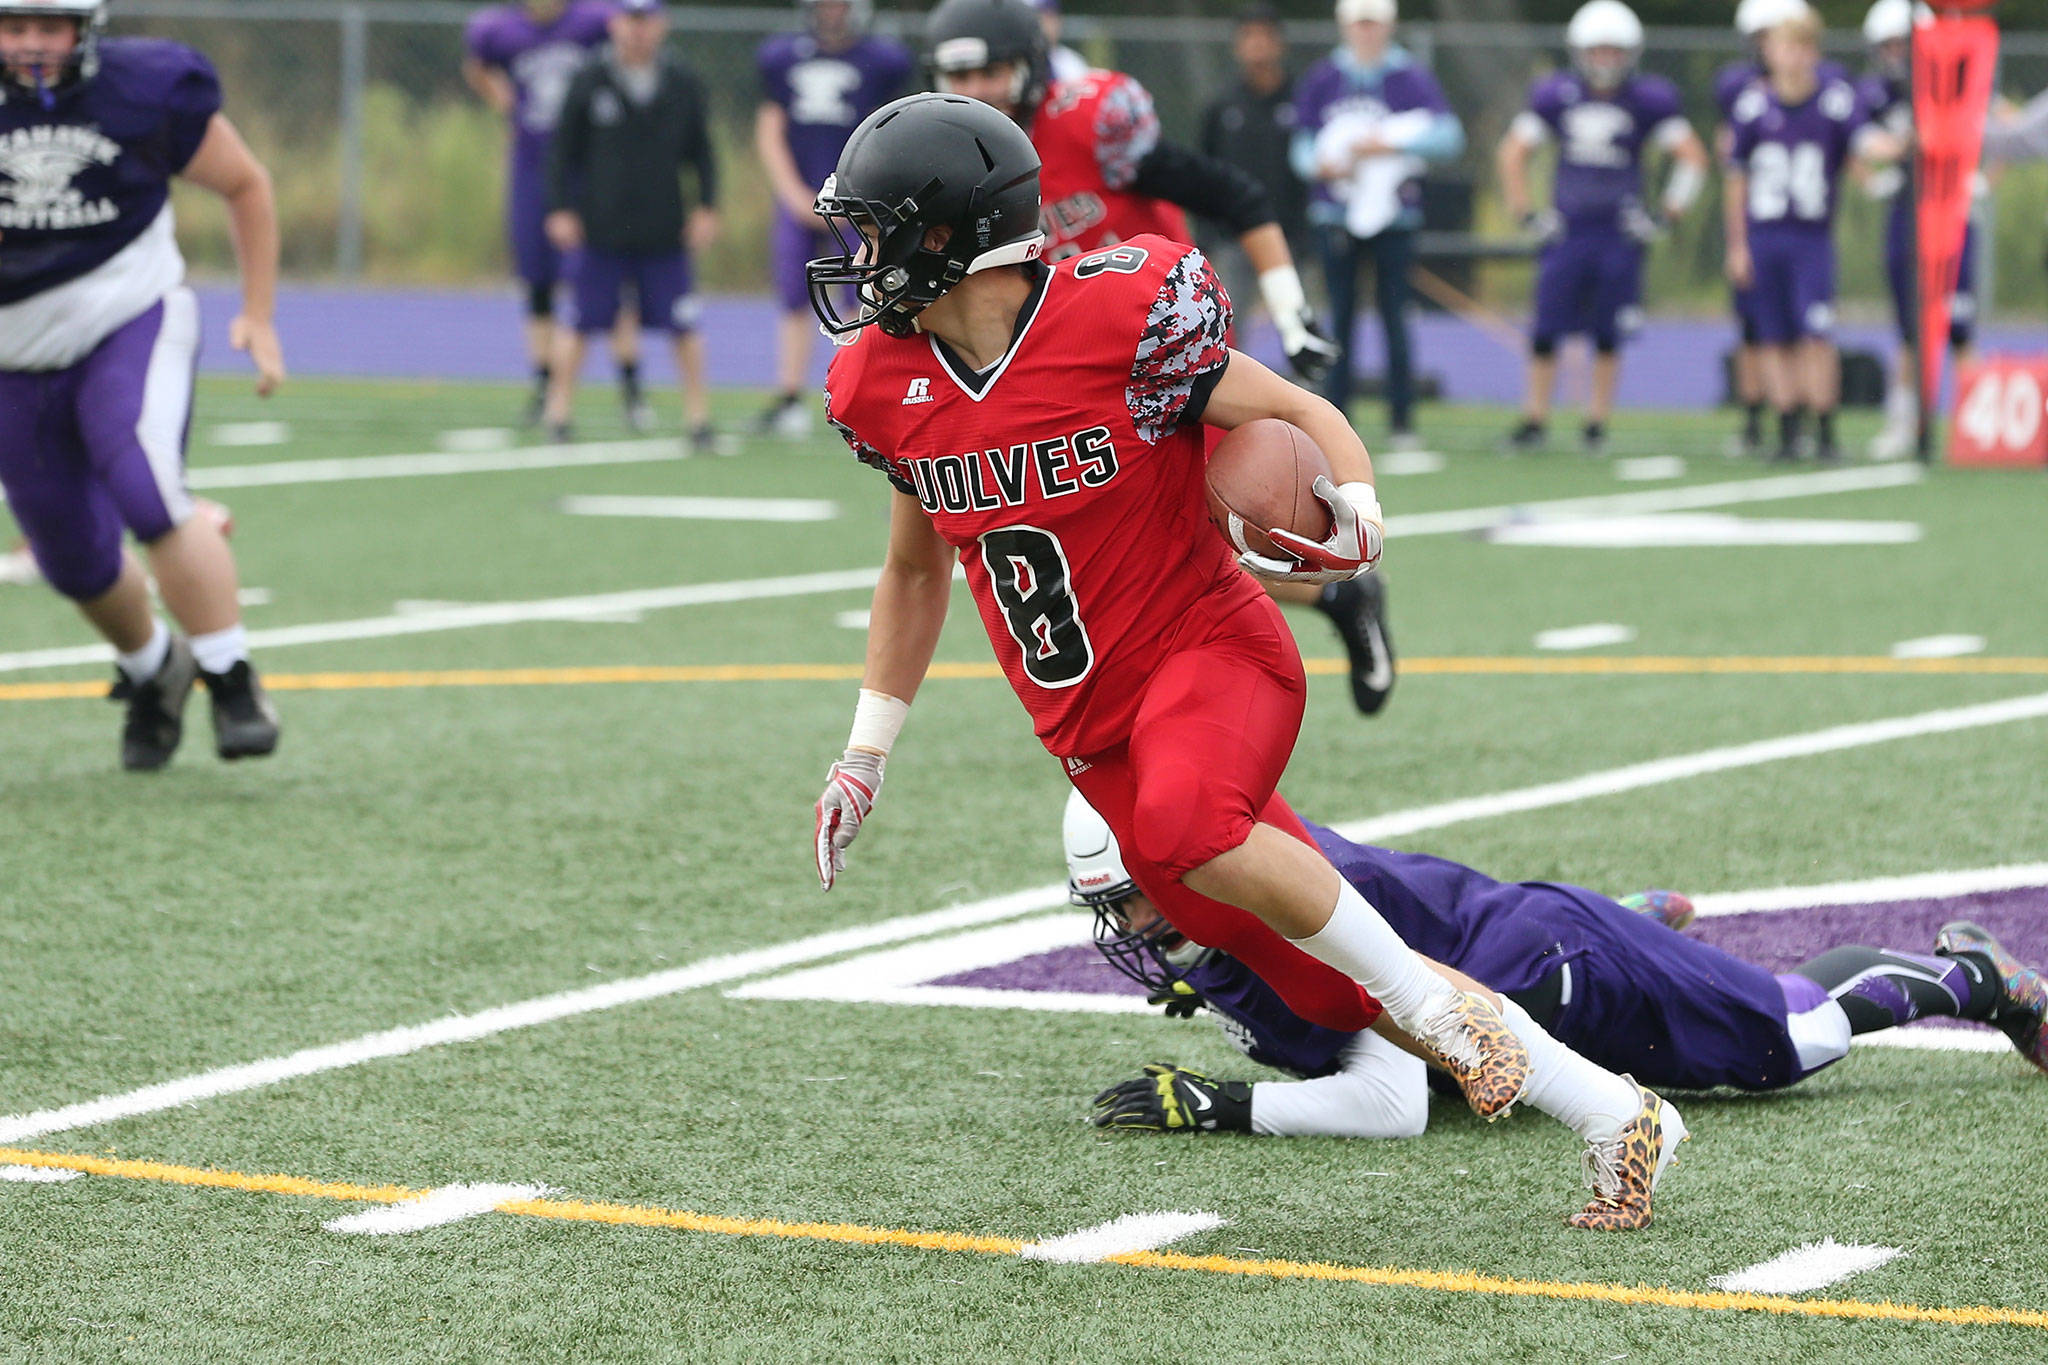 Coupeville’s Sean Toomey-Stout leaves an Anacortes defender behind in Saturday’s jamboree. (Photo by John Fisken)